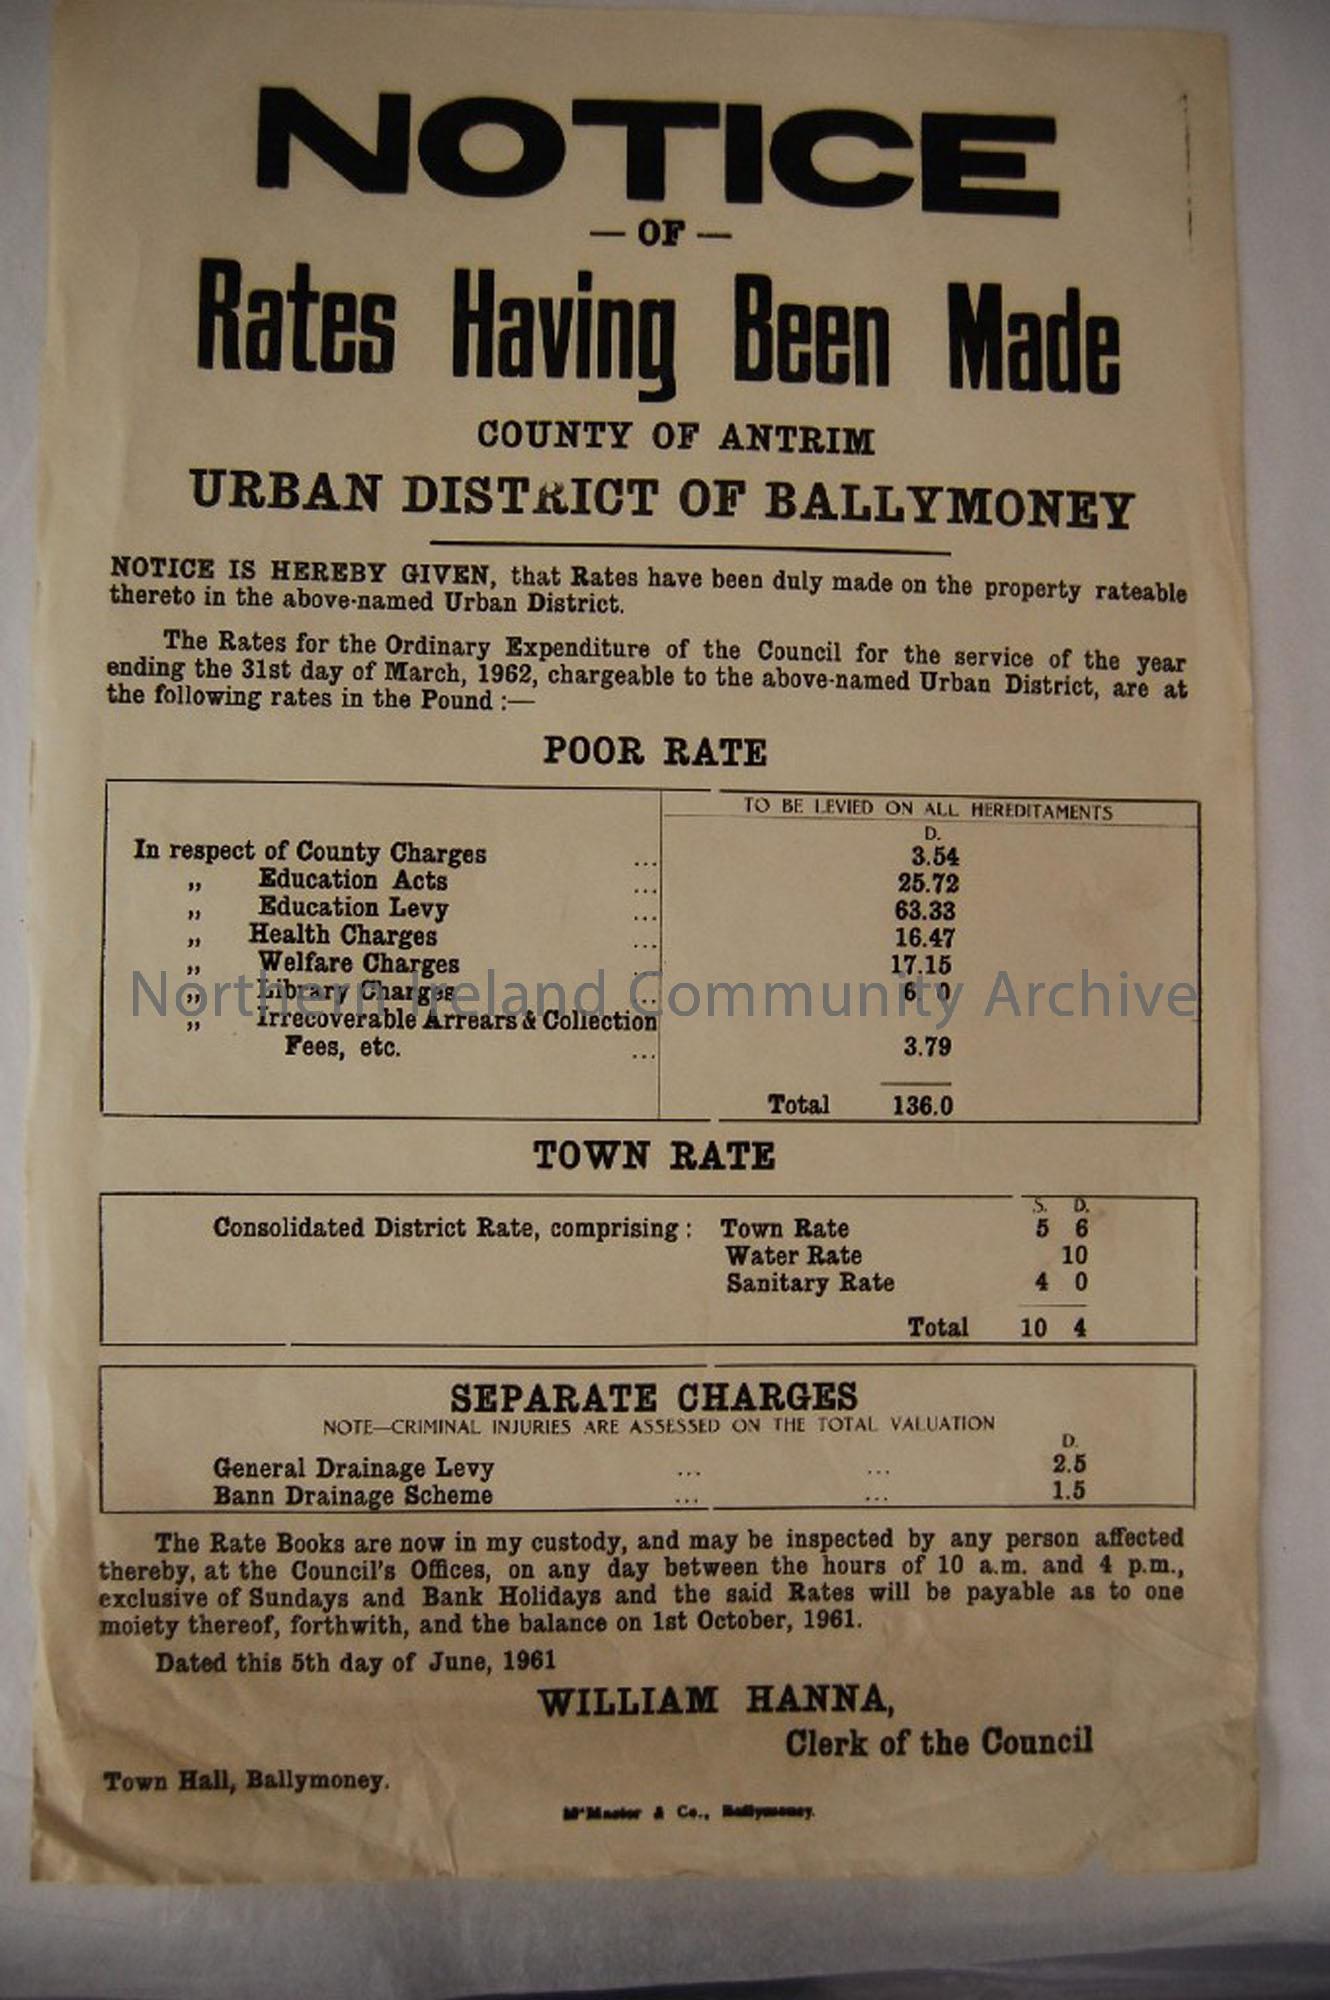 Public Notice announcing the Rates for the expenditure of Ballymoney Urban District Council for the service of the year ending 31st March 1962. Issued…